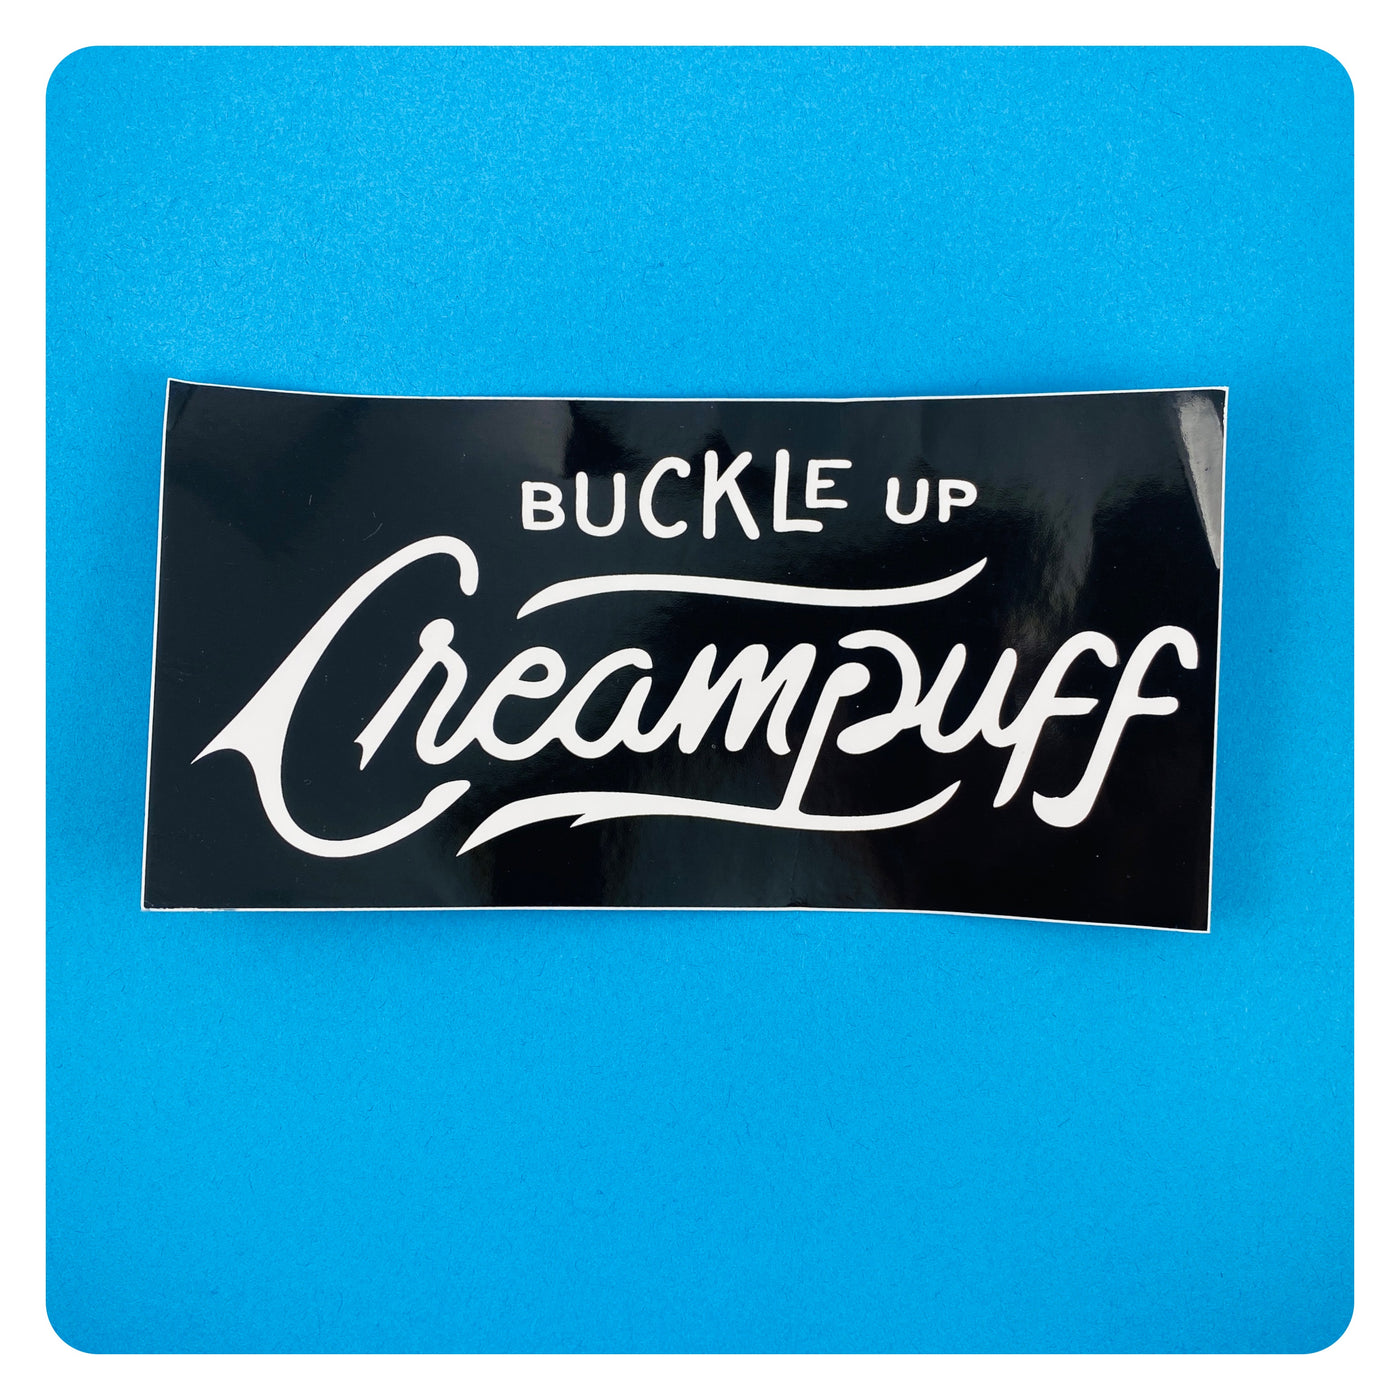 Buckle Up Creampuff Sticker Black and White